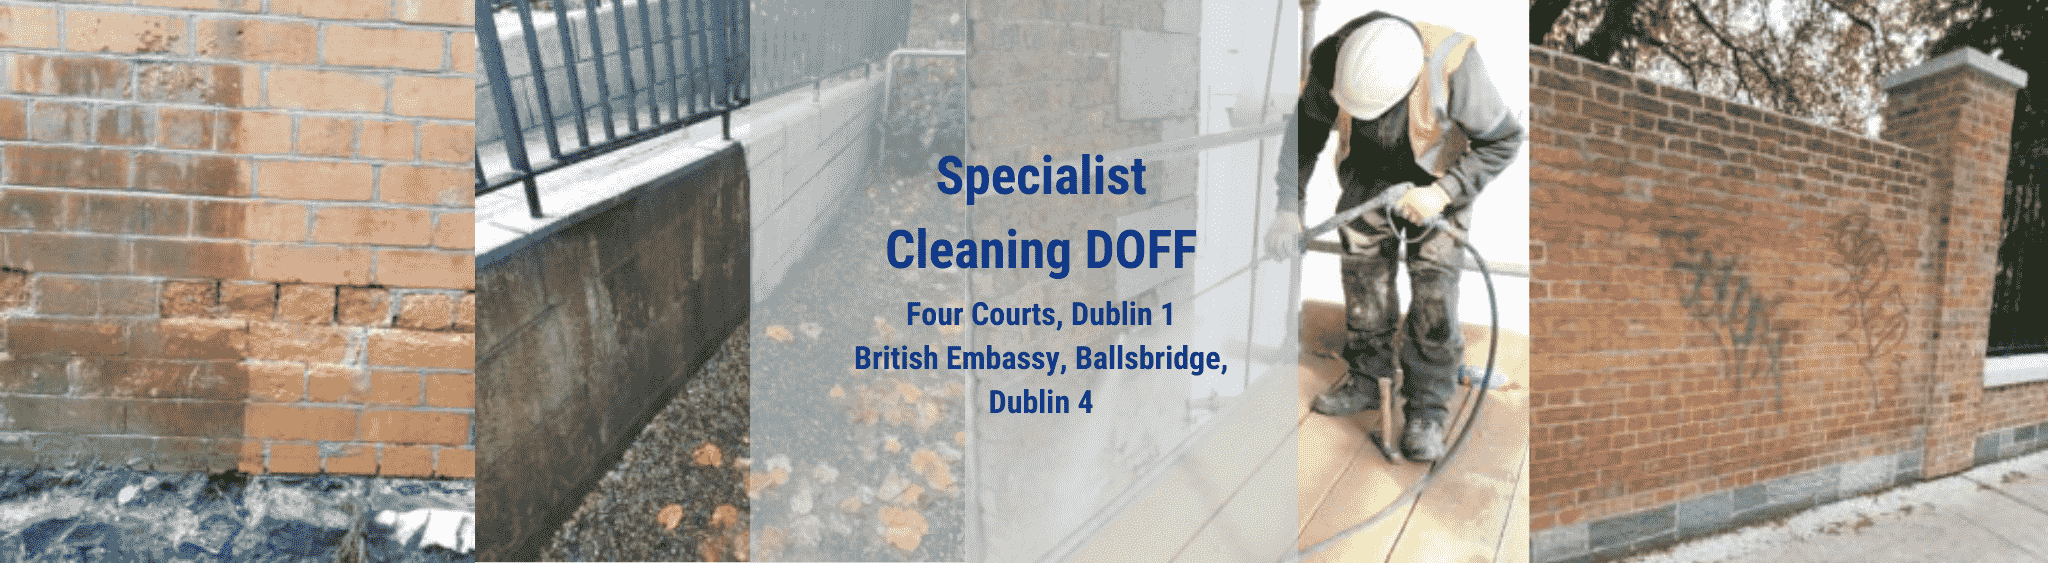 Specialist Cleaning DOFF